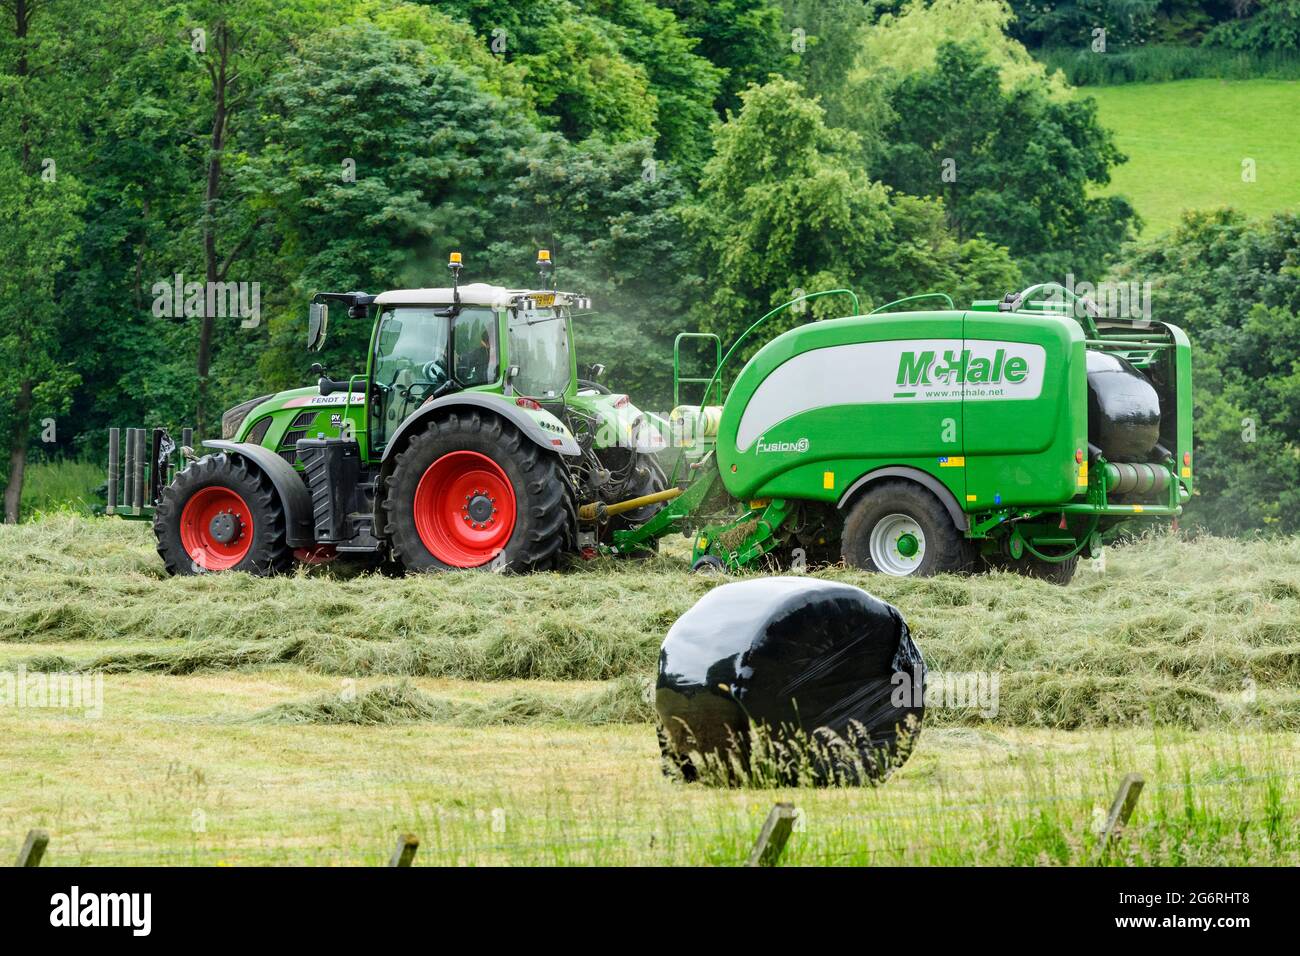 Hay & silage making (farmer in farm tractor at work in scenic rural field, collecting dry grass, wrapped round bale in baler) - Yorkshire England, UK. Stock Photo